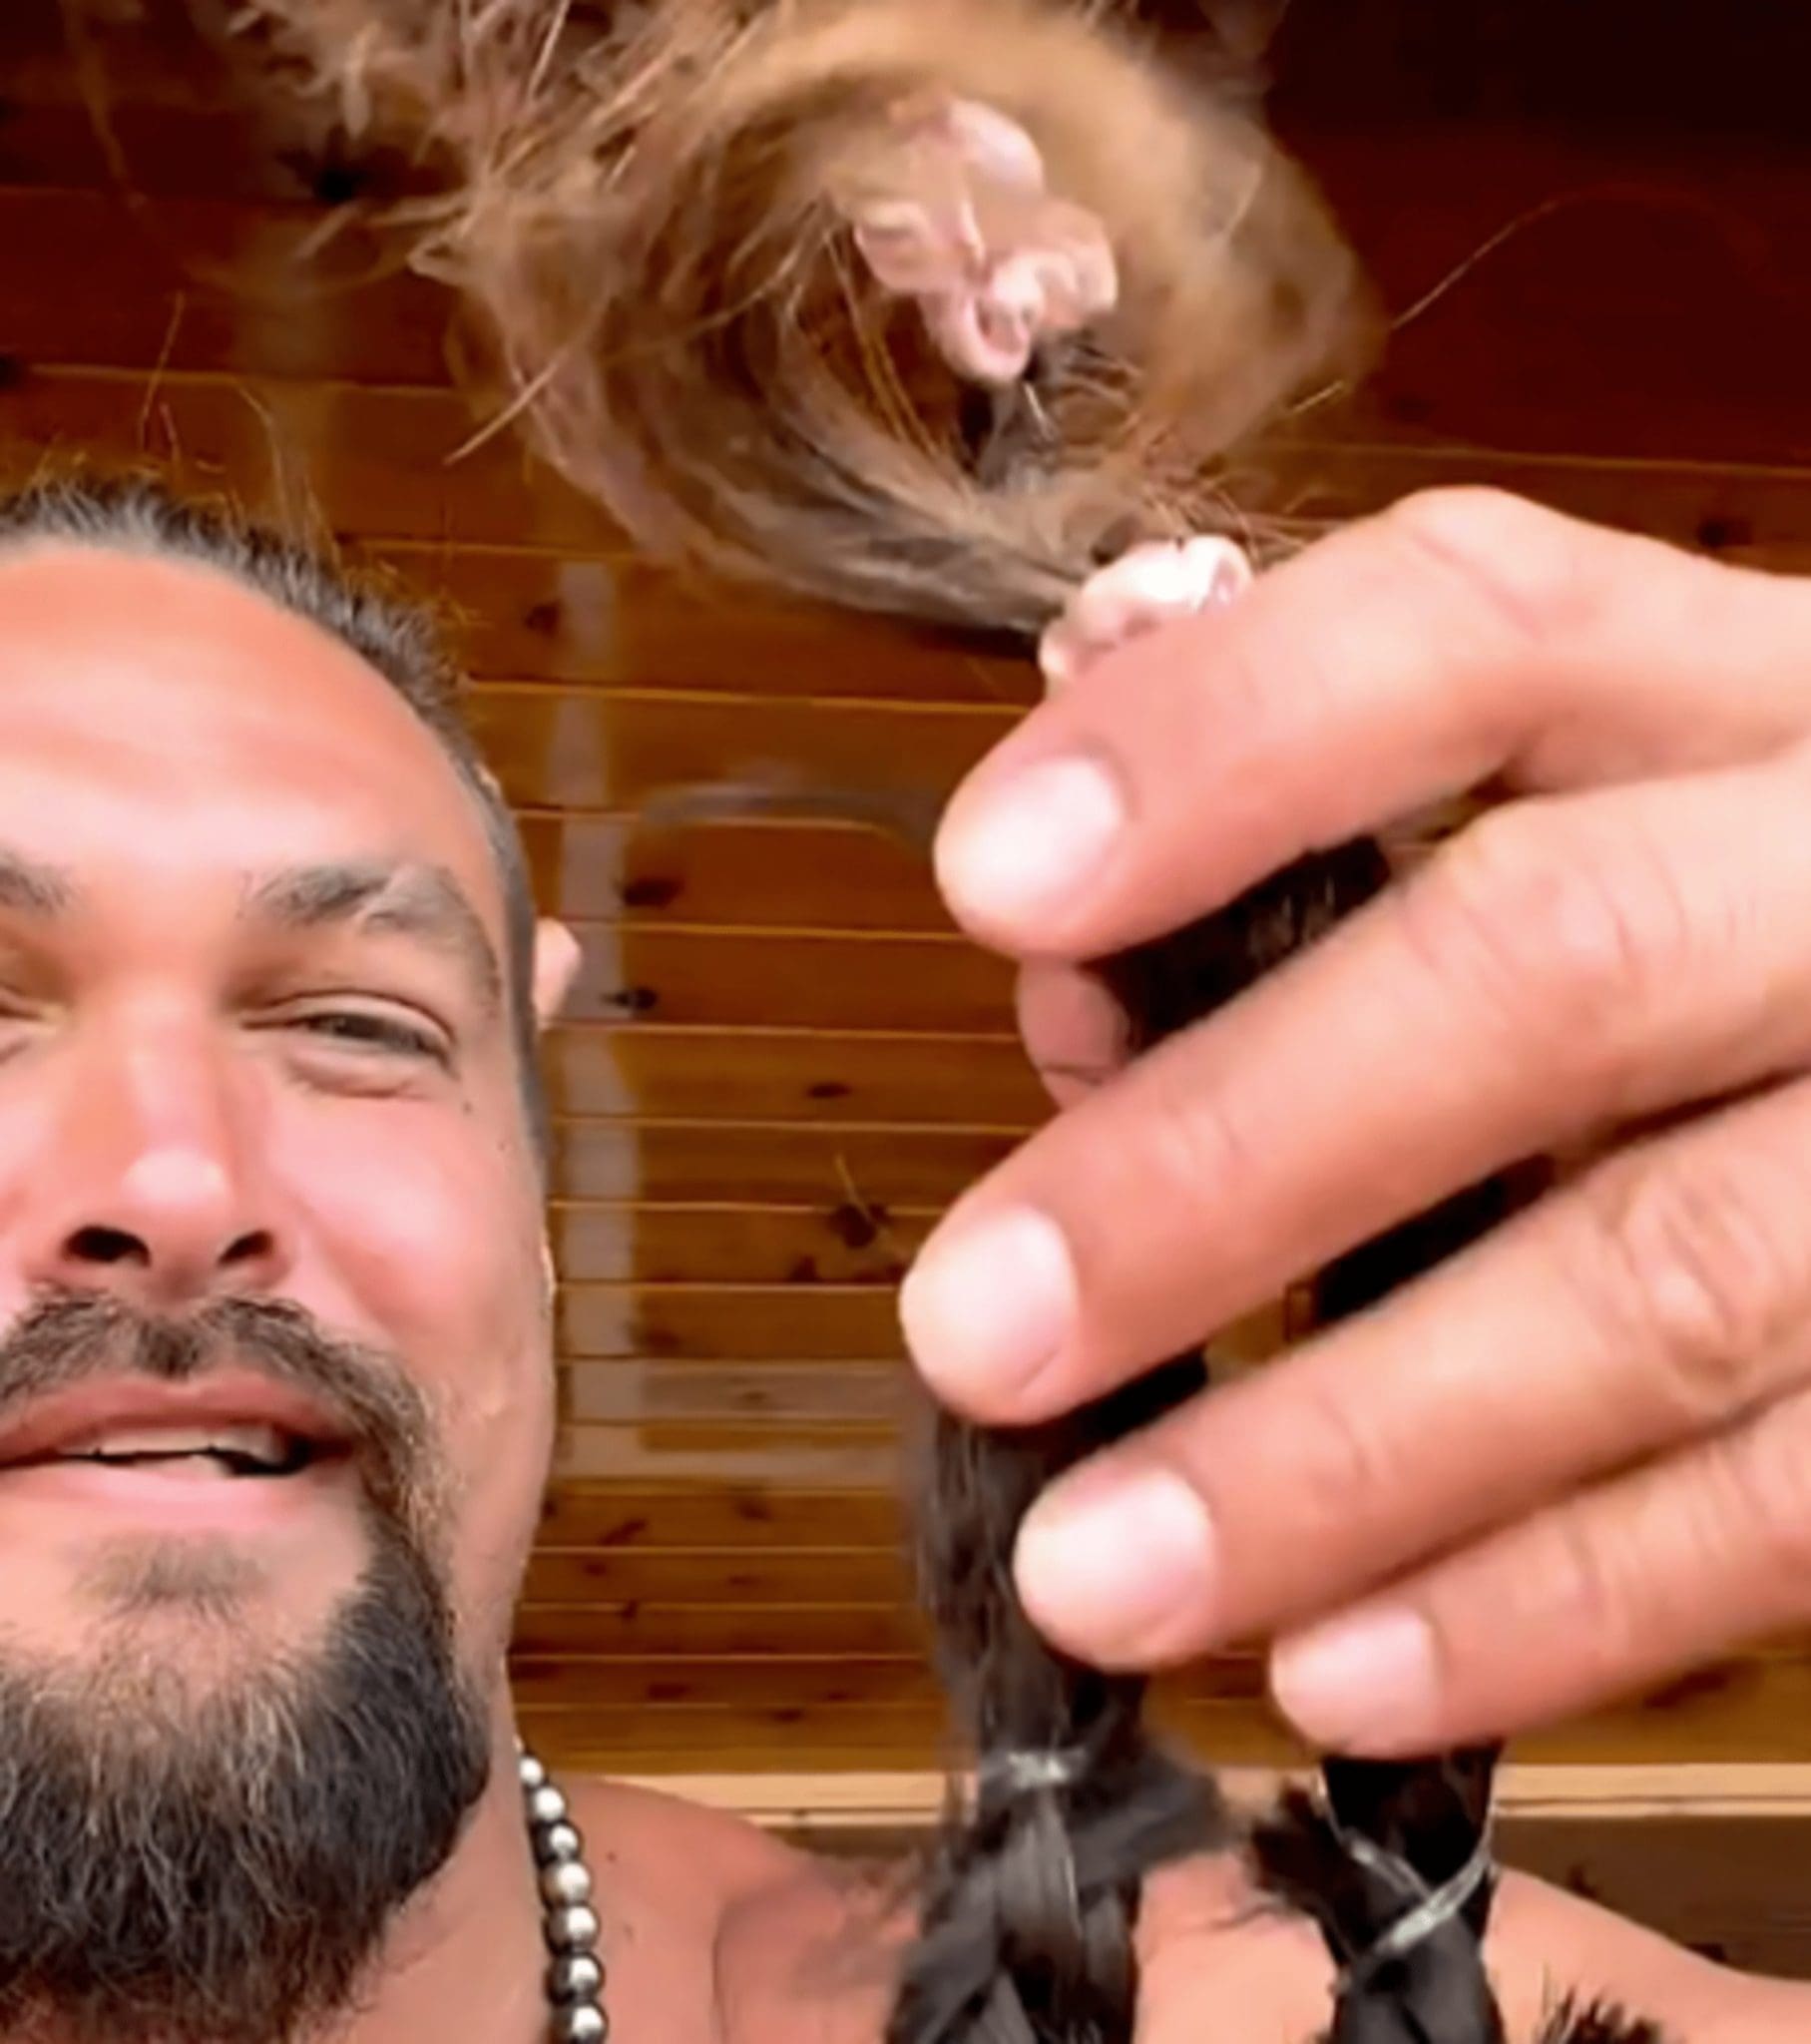 Jason Mamoa Shocked His Followers By Uploading A Video Of Himself Receiving An Extreme Haircut